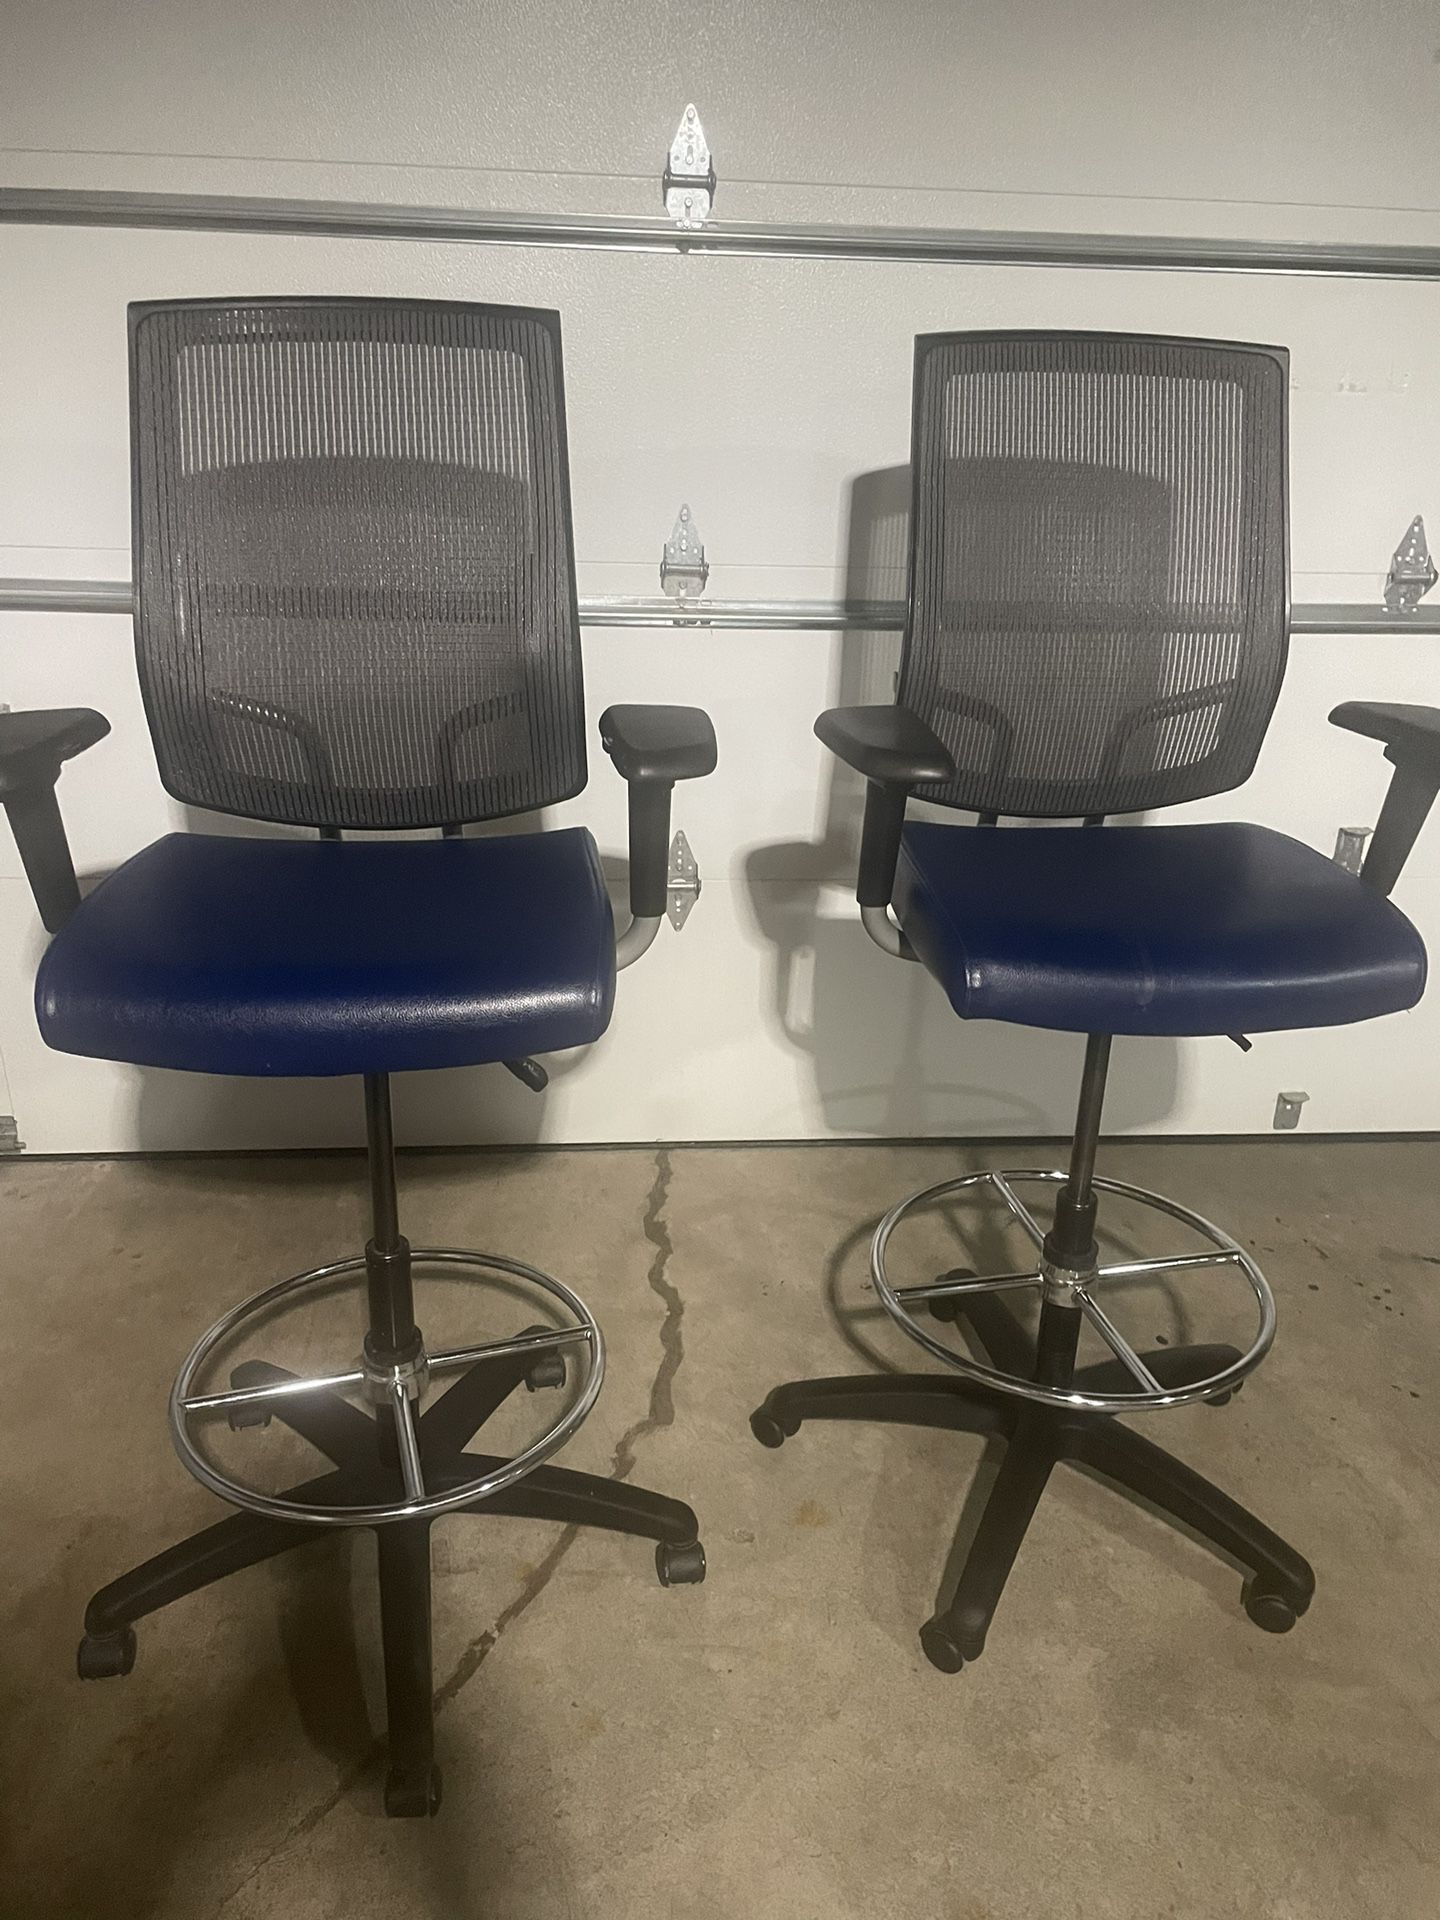 Office Barstool Chairs 